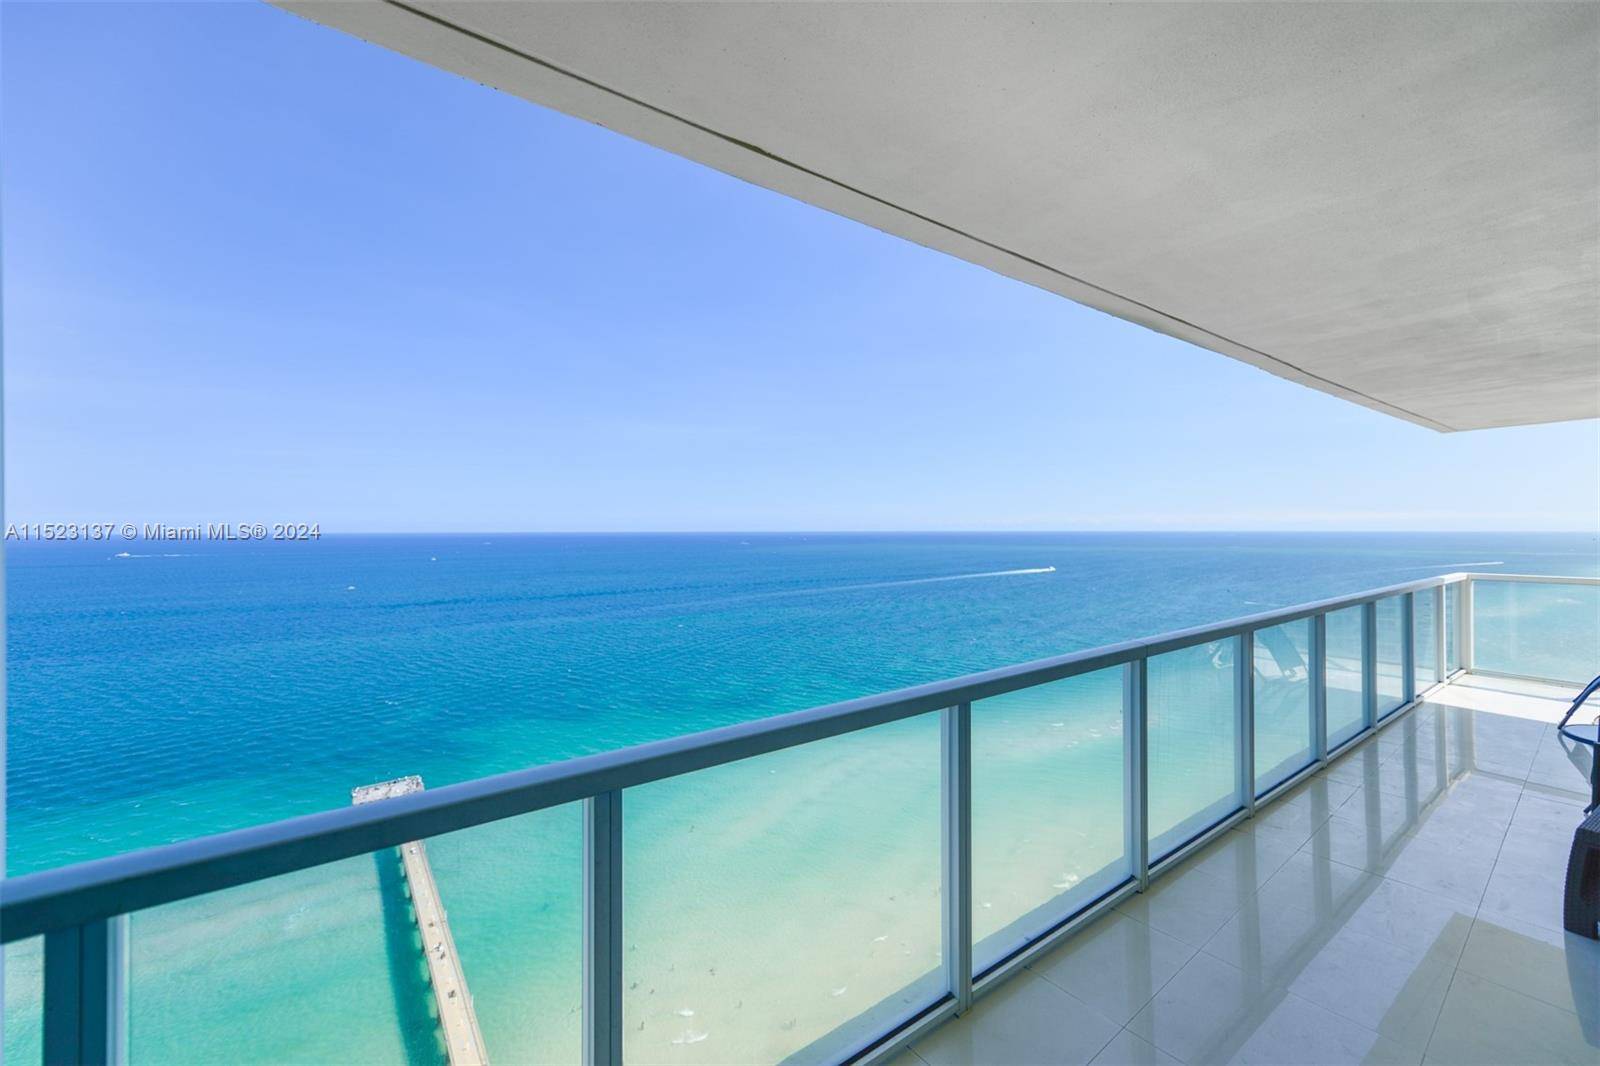 The most desirable 02 line in La Perla, southeast corner with direct unobstructed ocean views from every room.